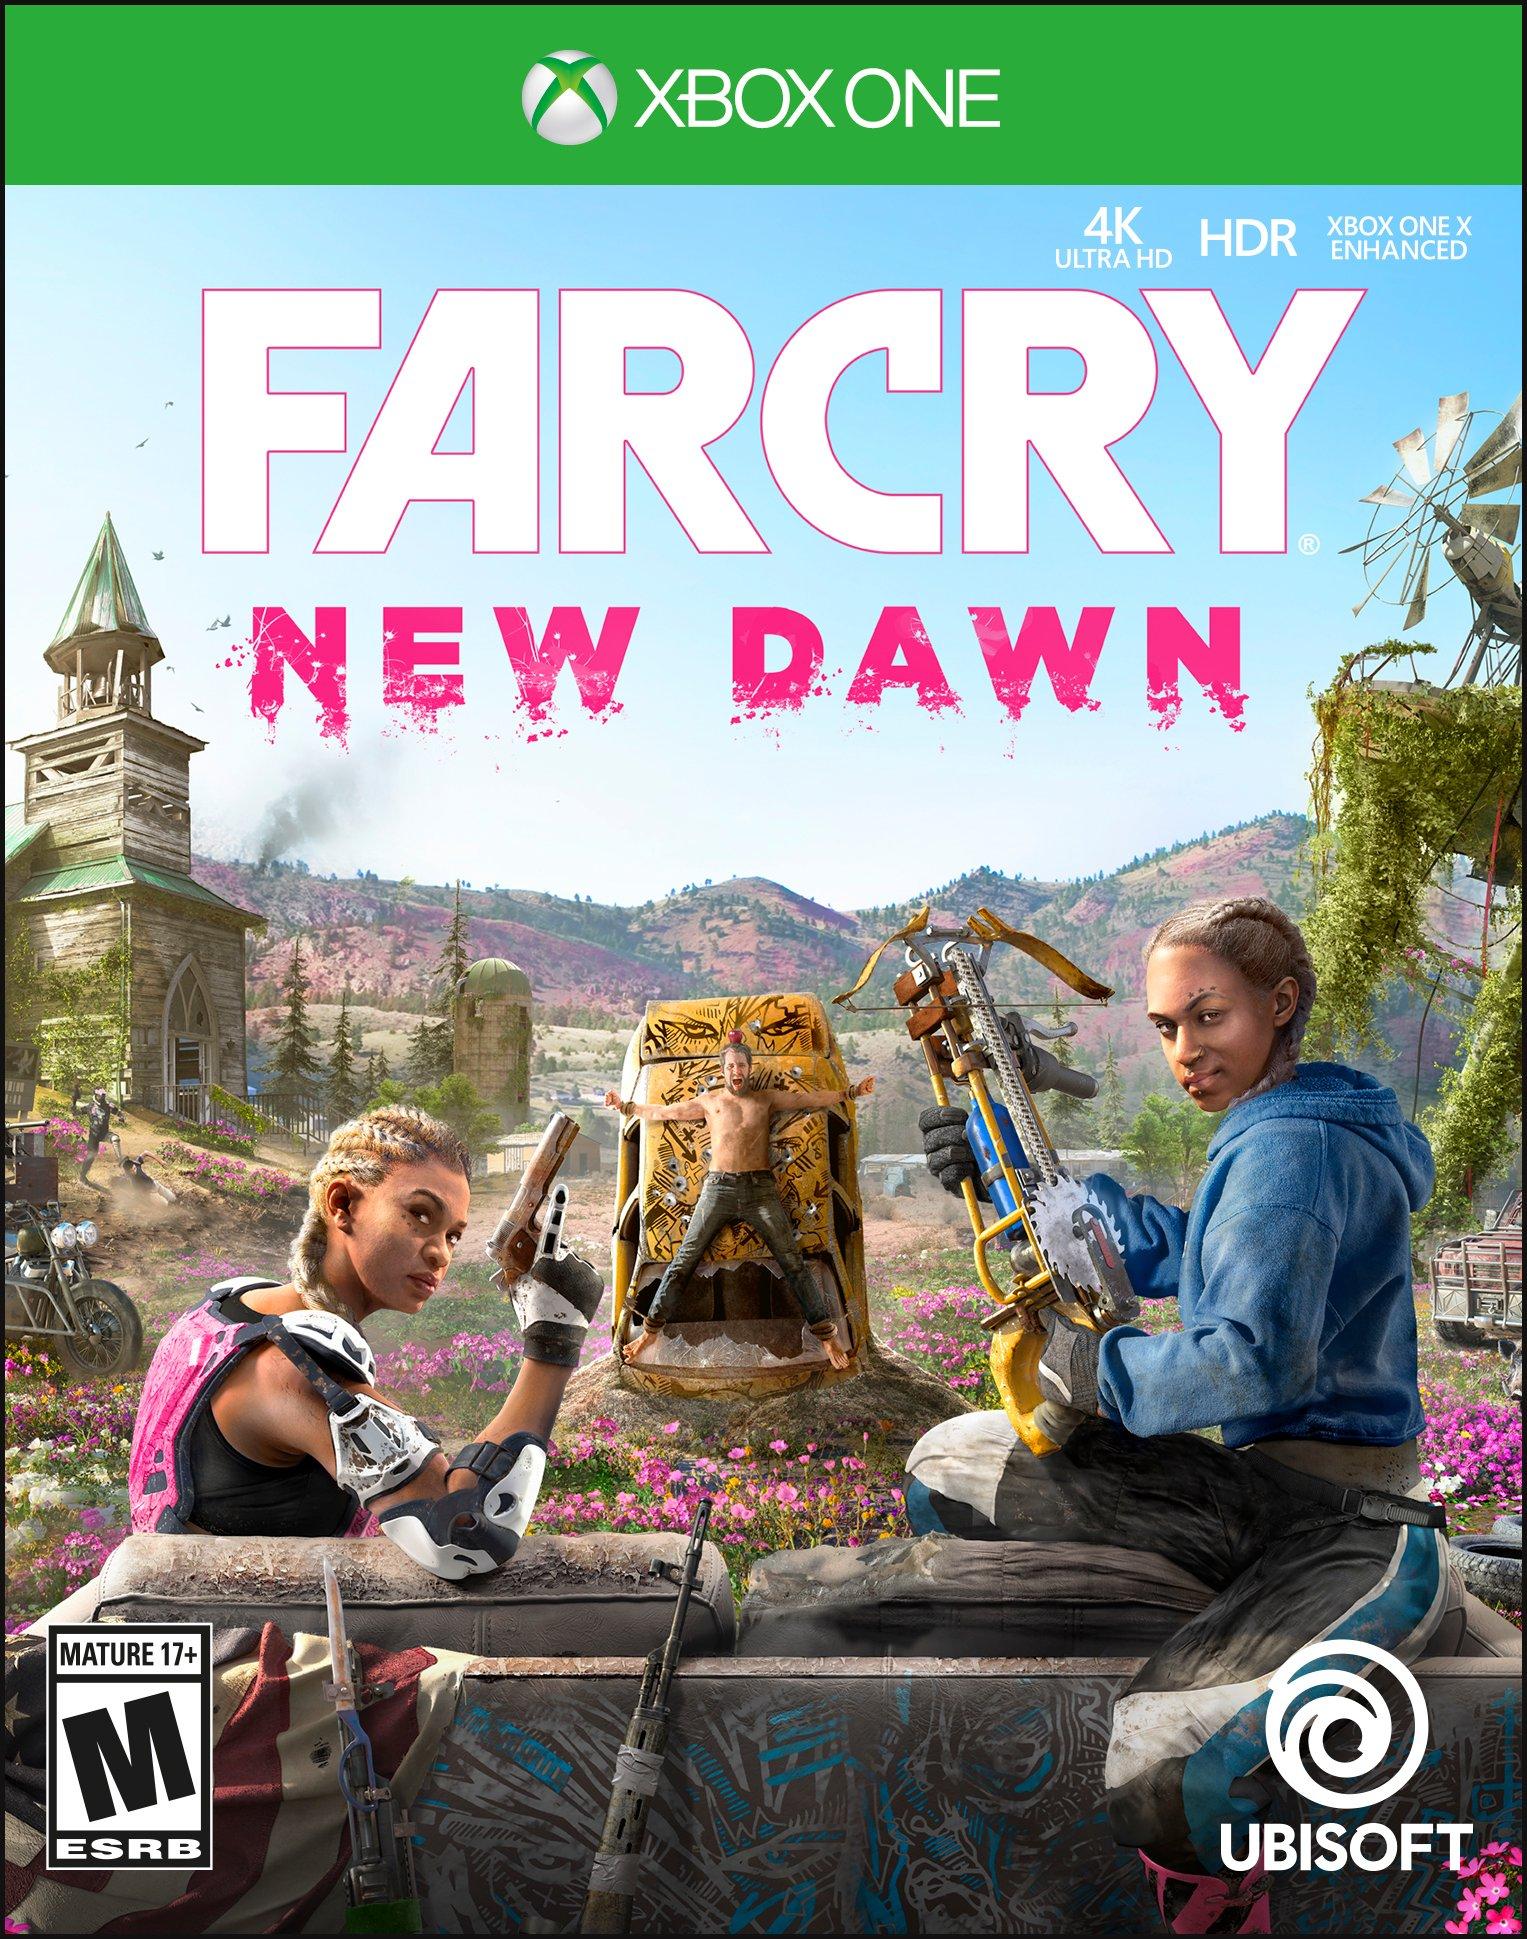 new dawn video game